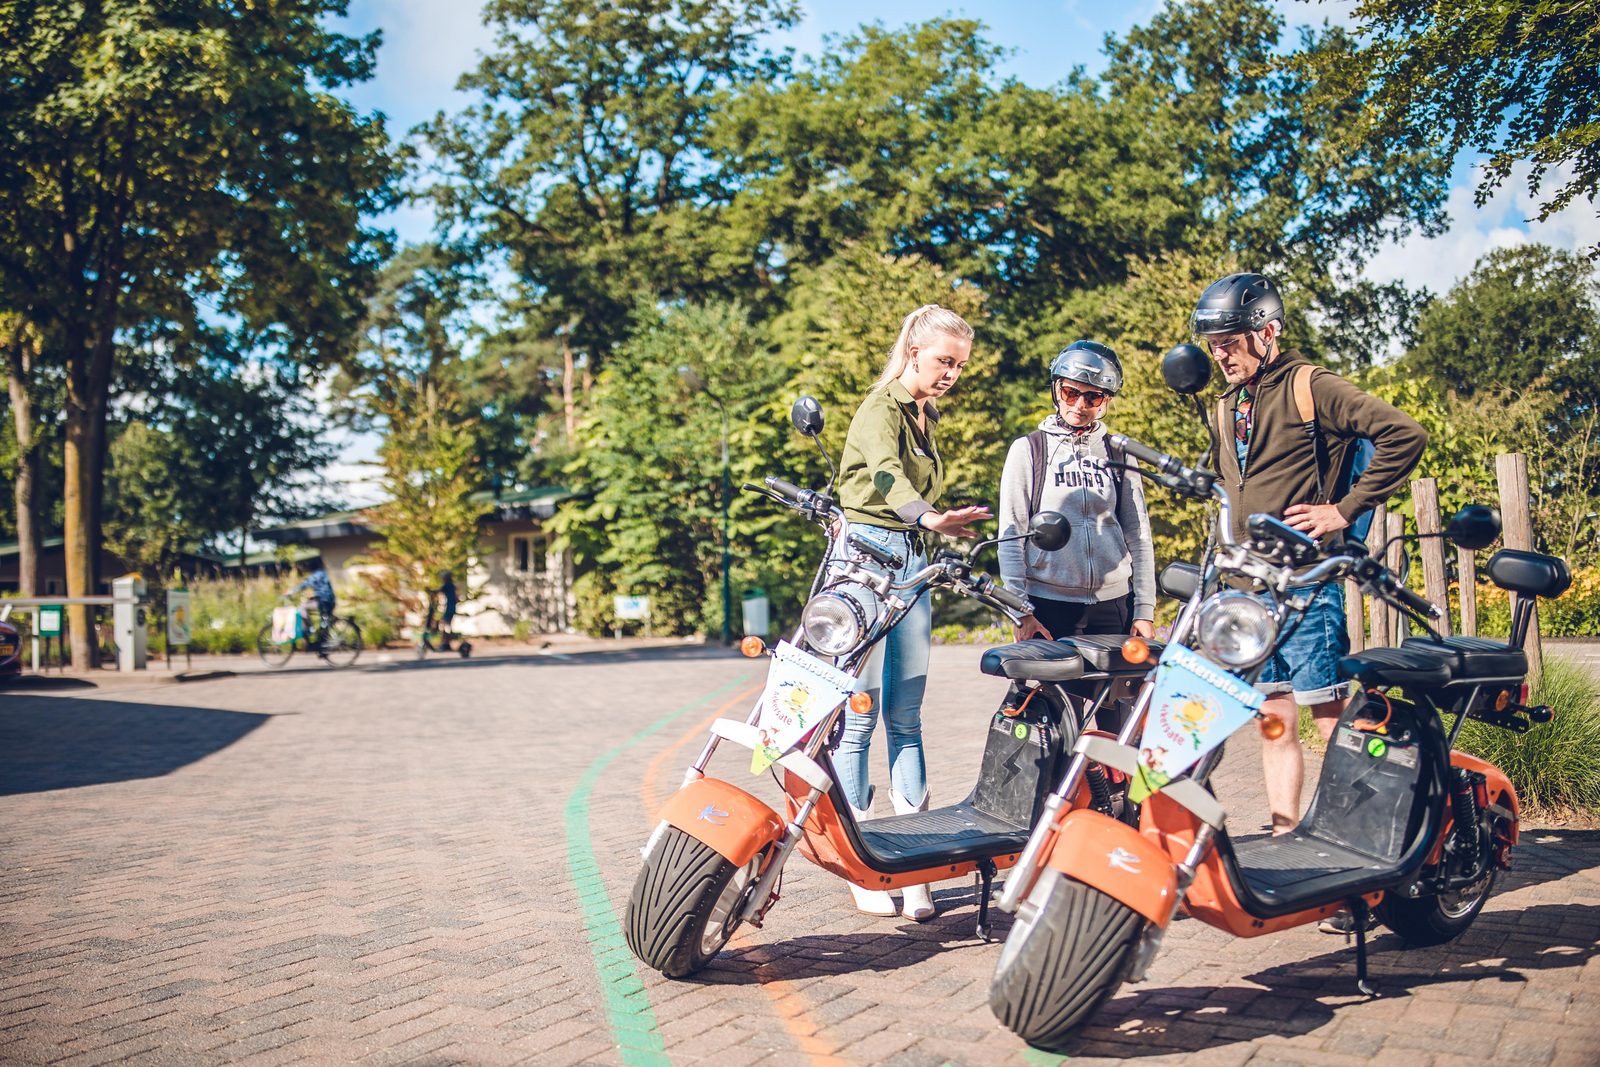 Scooter hire